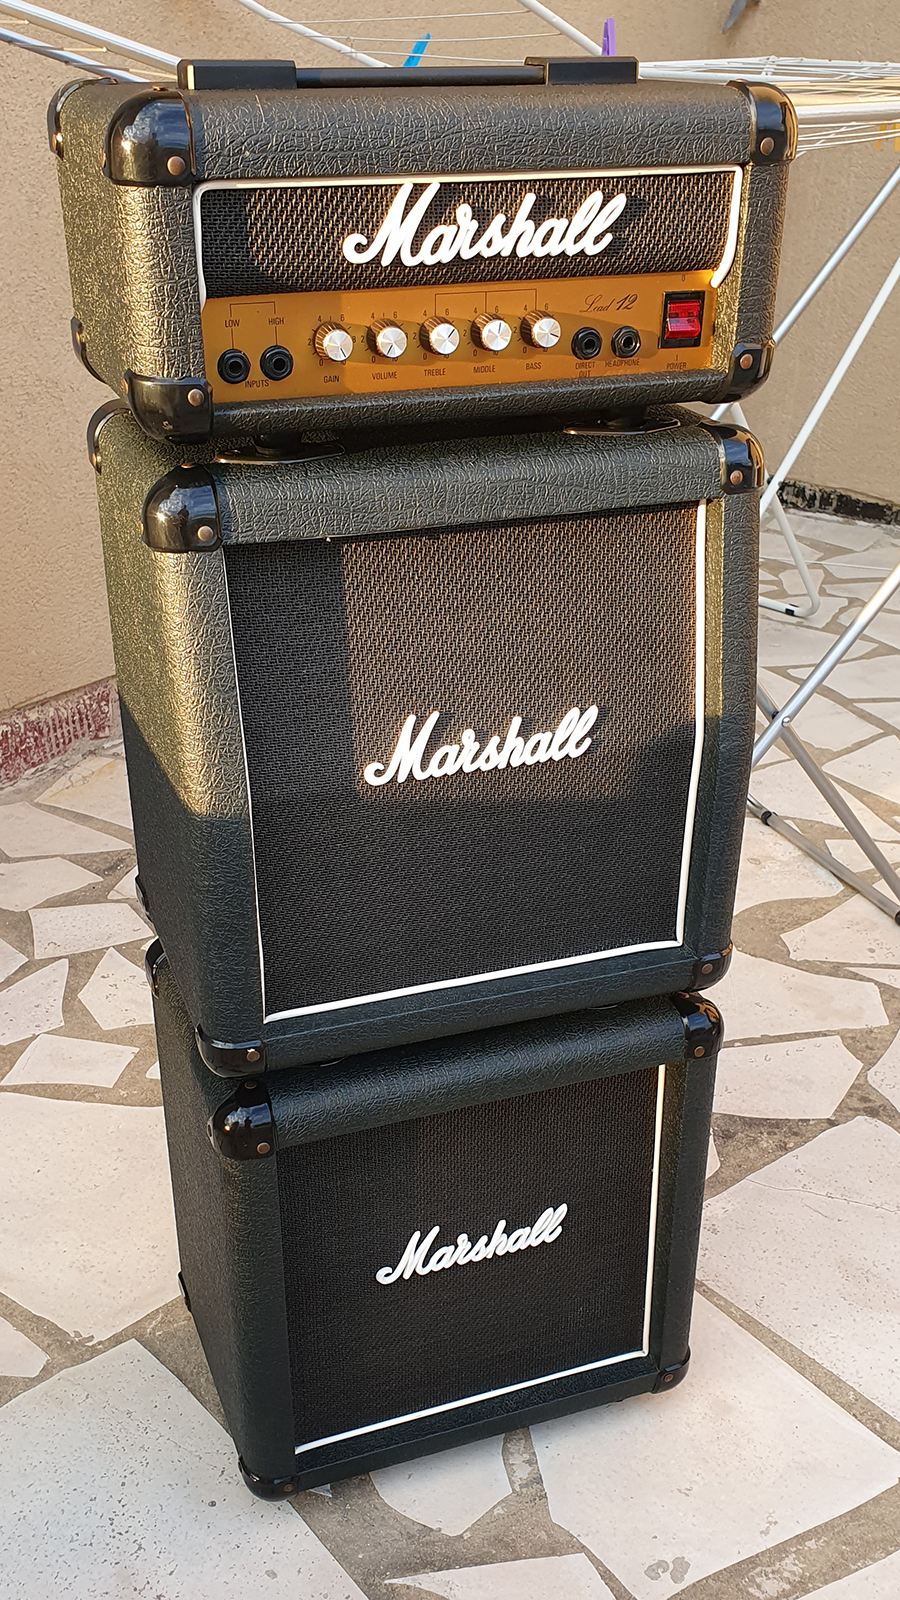 3005 Lead 12 Micro Stack - Marshall 3005 Lead 12 Micro Stack